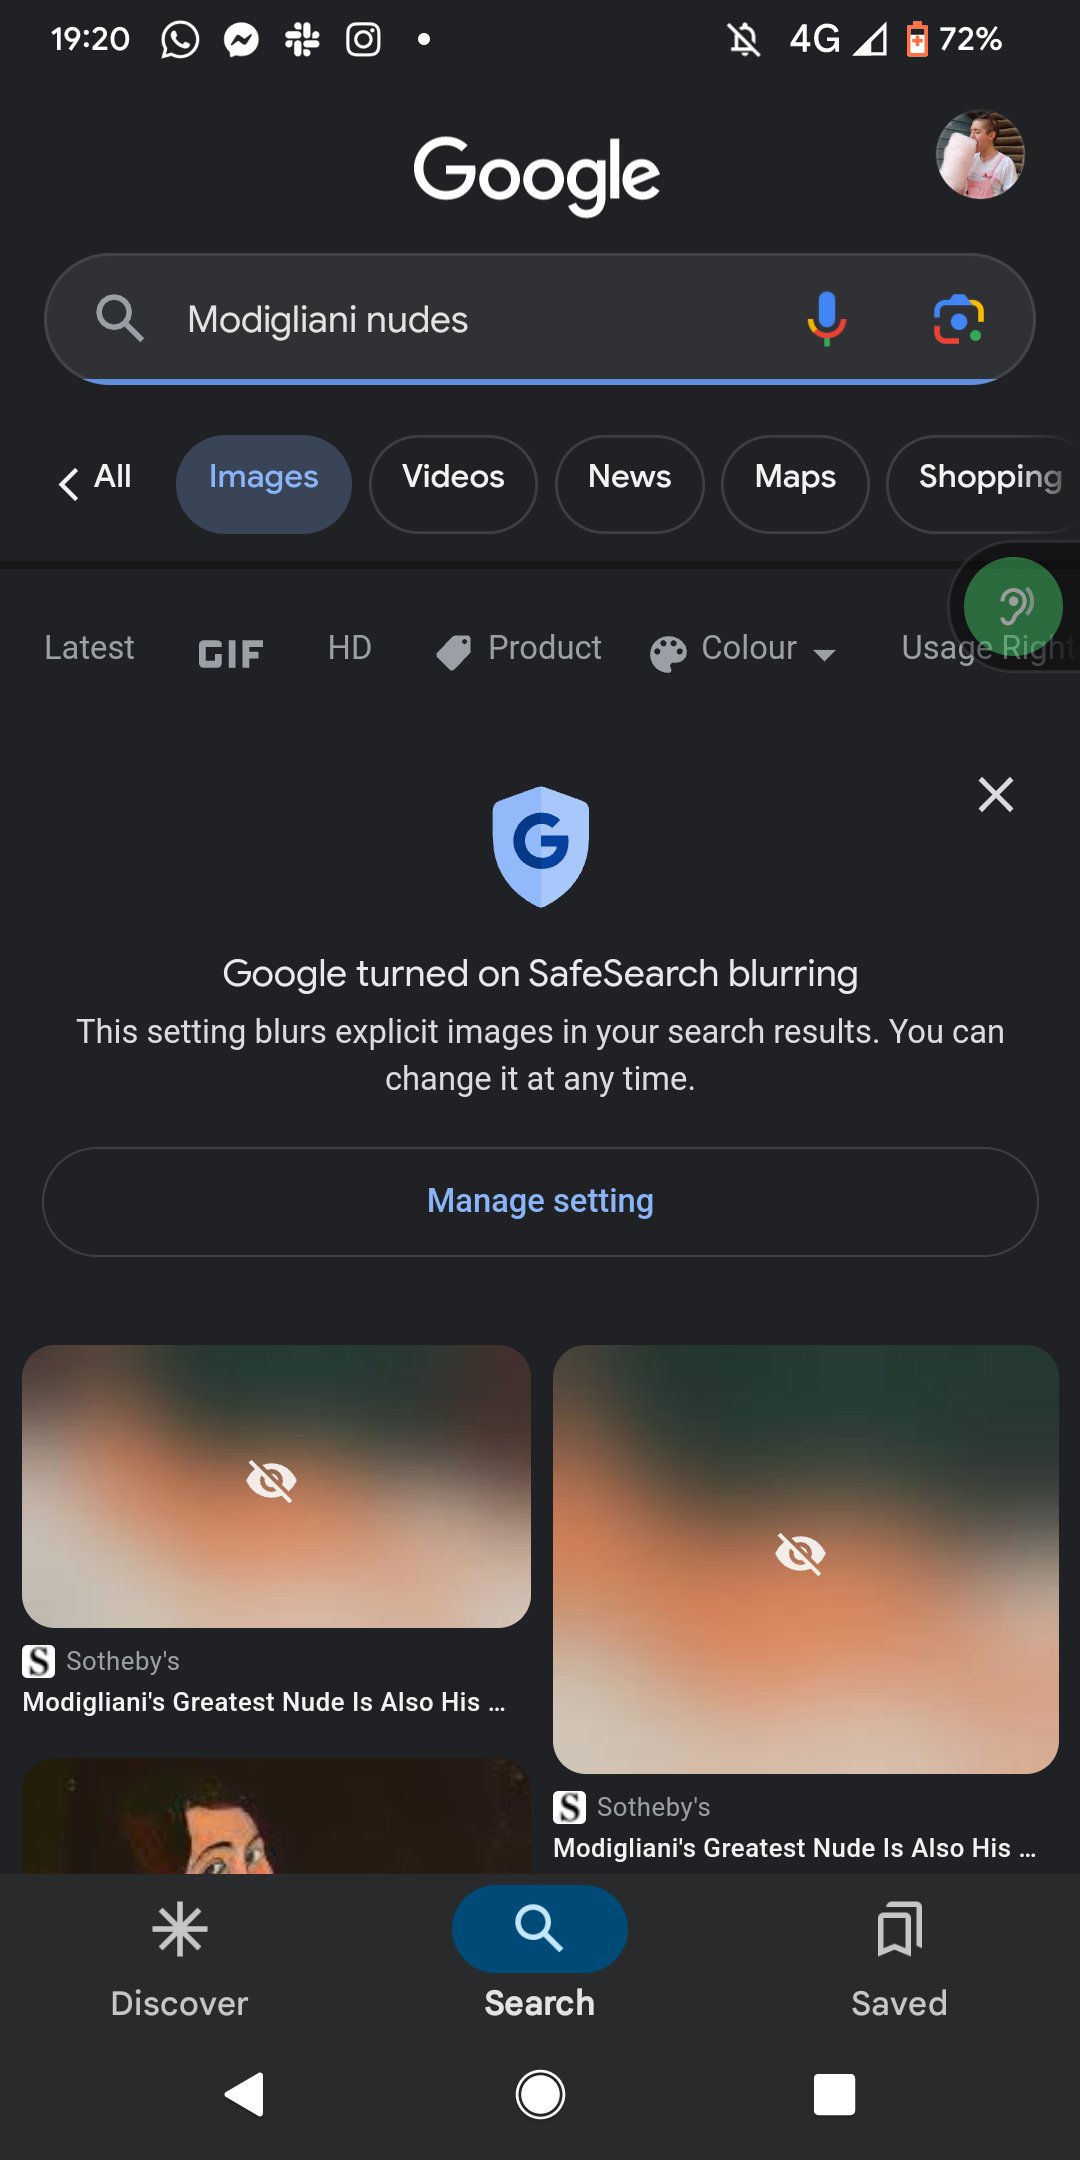 Screenshot of the Google Image search results for 'Modigliani nudes' taken on a Pixel phone, showing the top two returned images are blurred almost beyond recognition